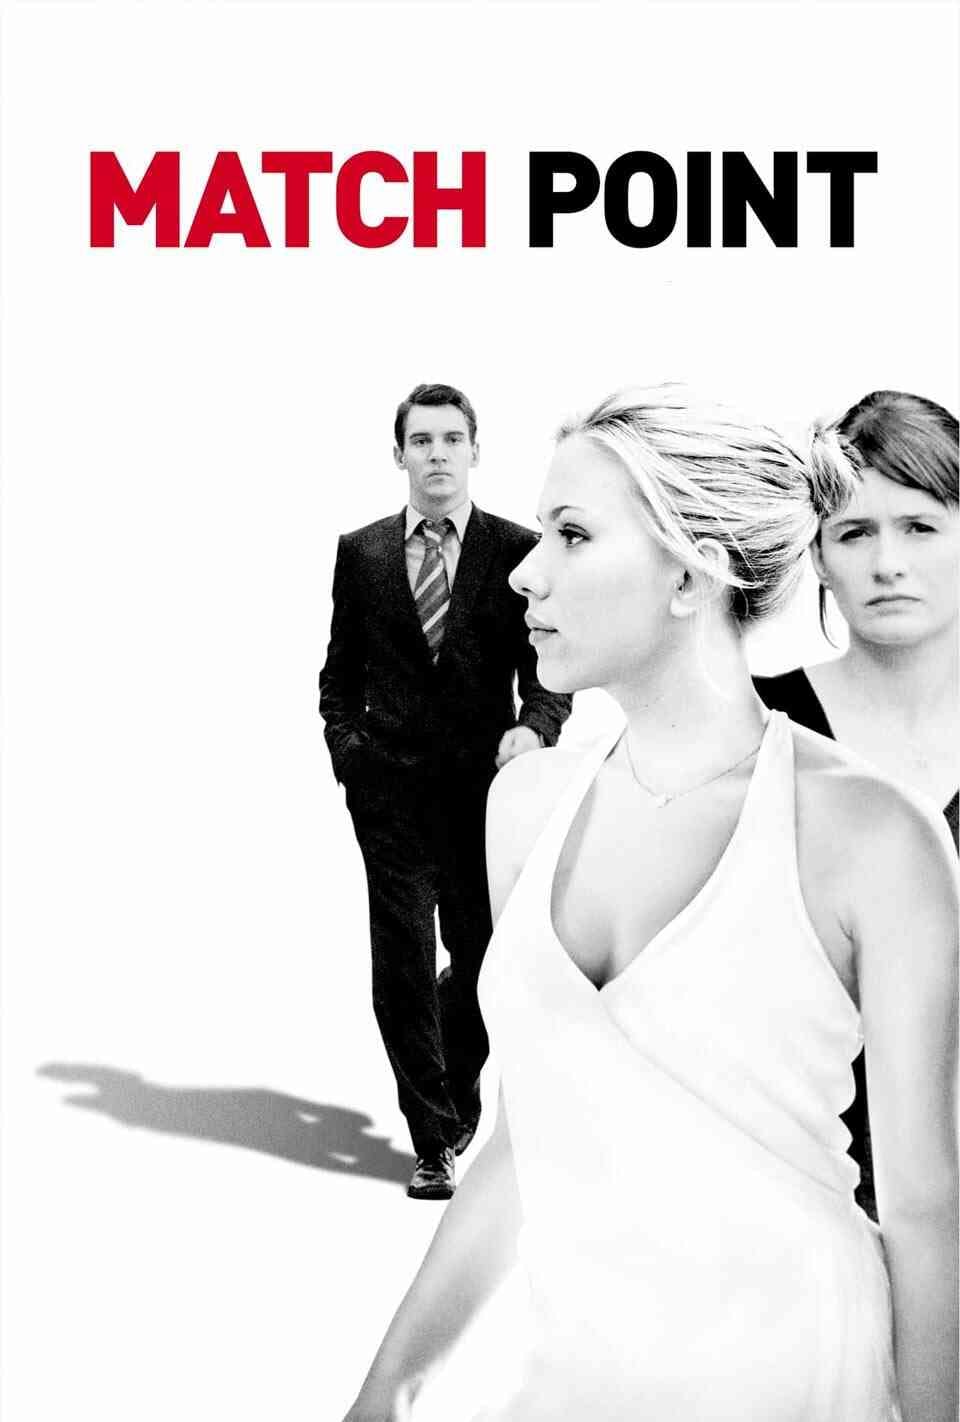 Read Match Point screenplay (poster)